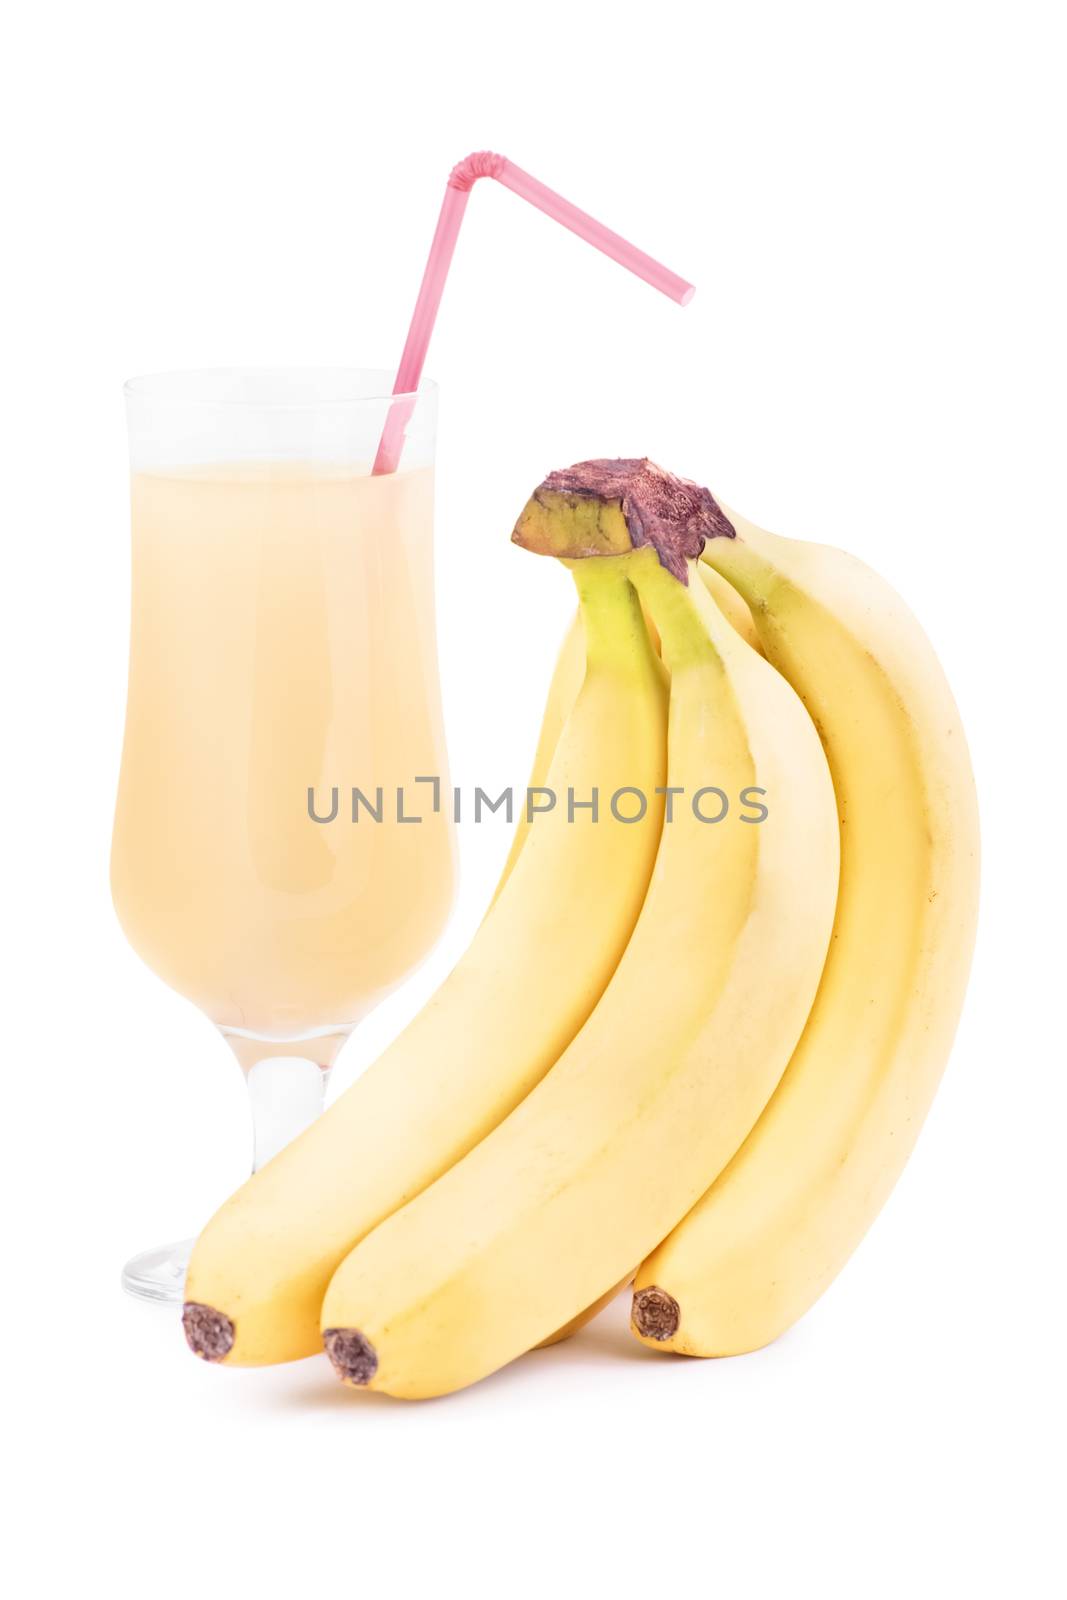 Bananas with a smoothie glass, isolated on white background.